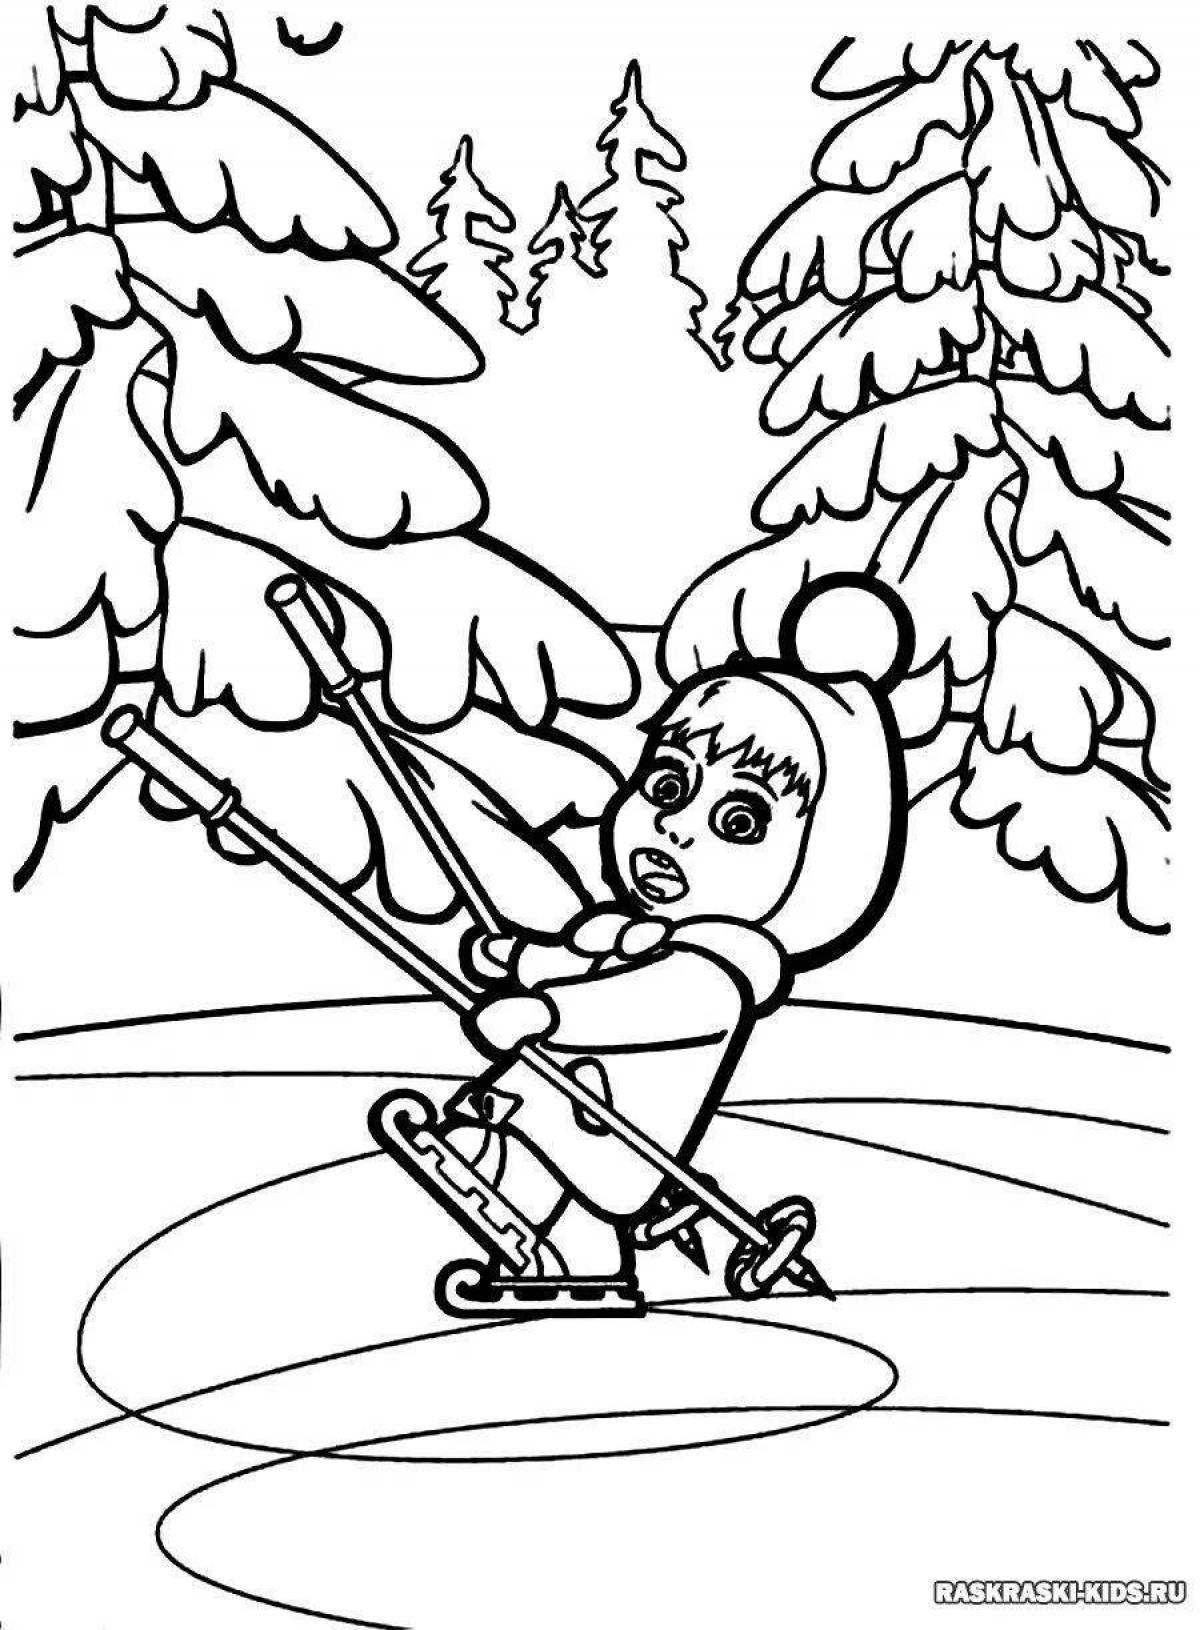 Winter safety coloring page